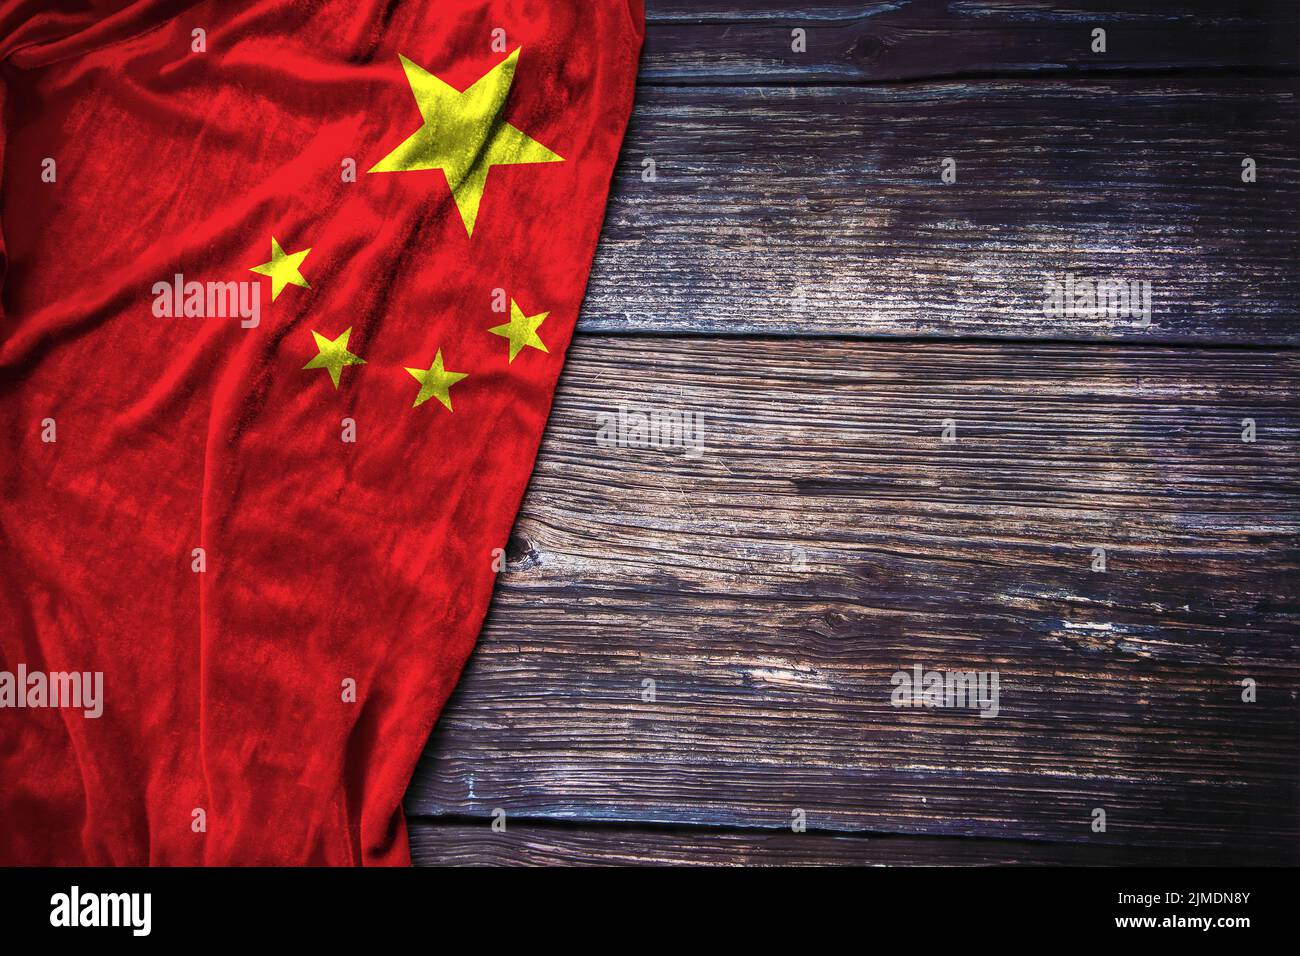 Chinese flag on rustic wooden background for Martyrs Day, China National Day or Labor Day concept. Stock Photo